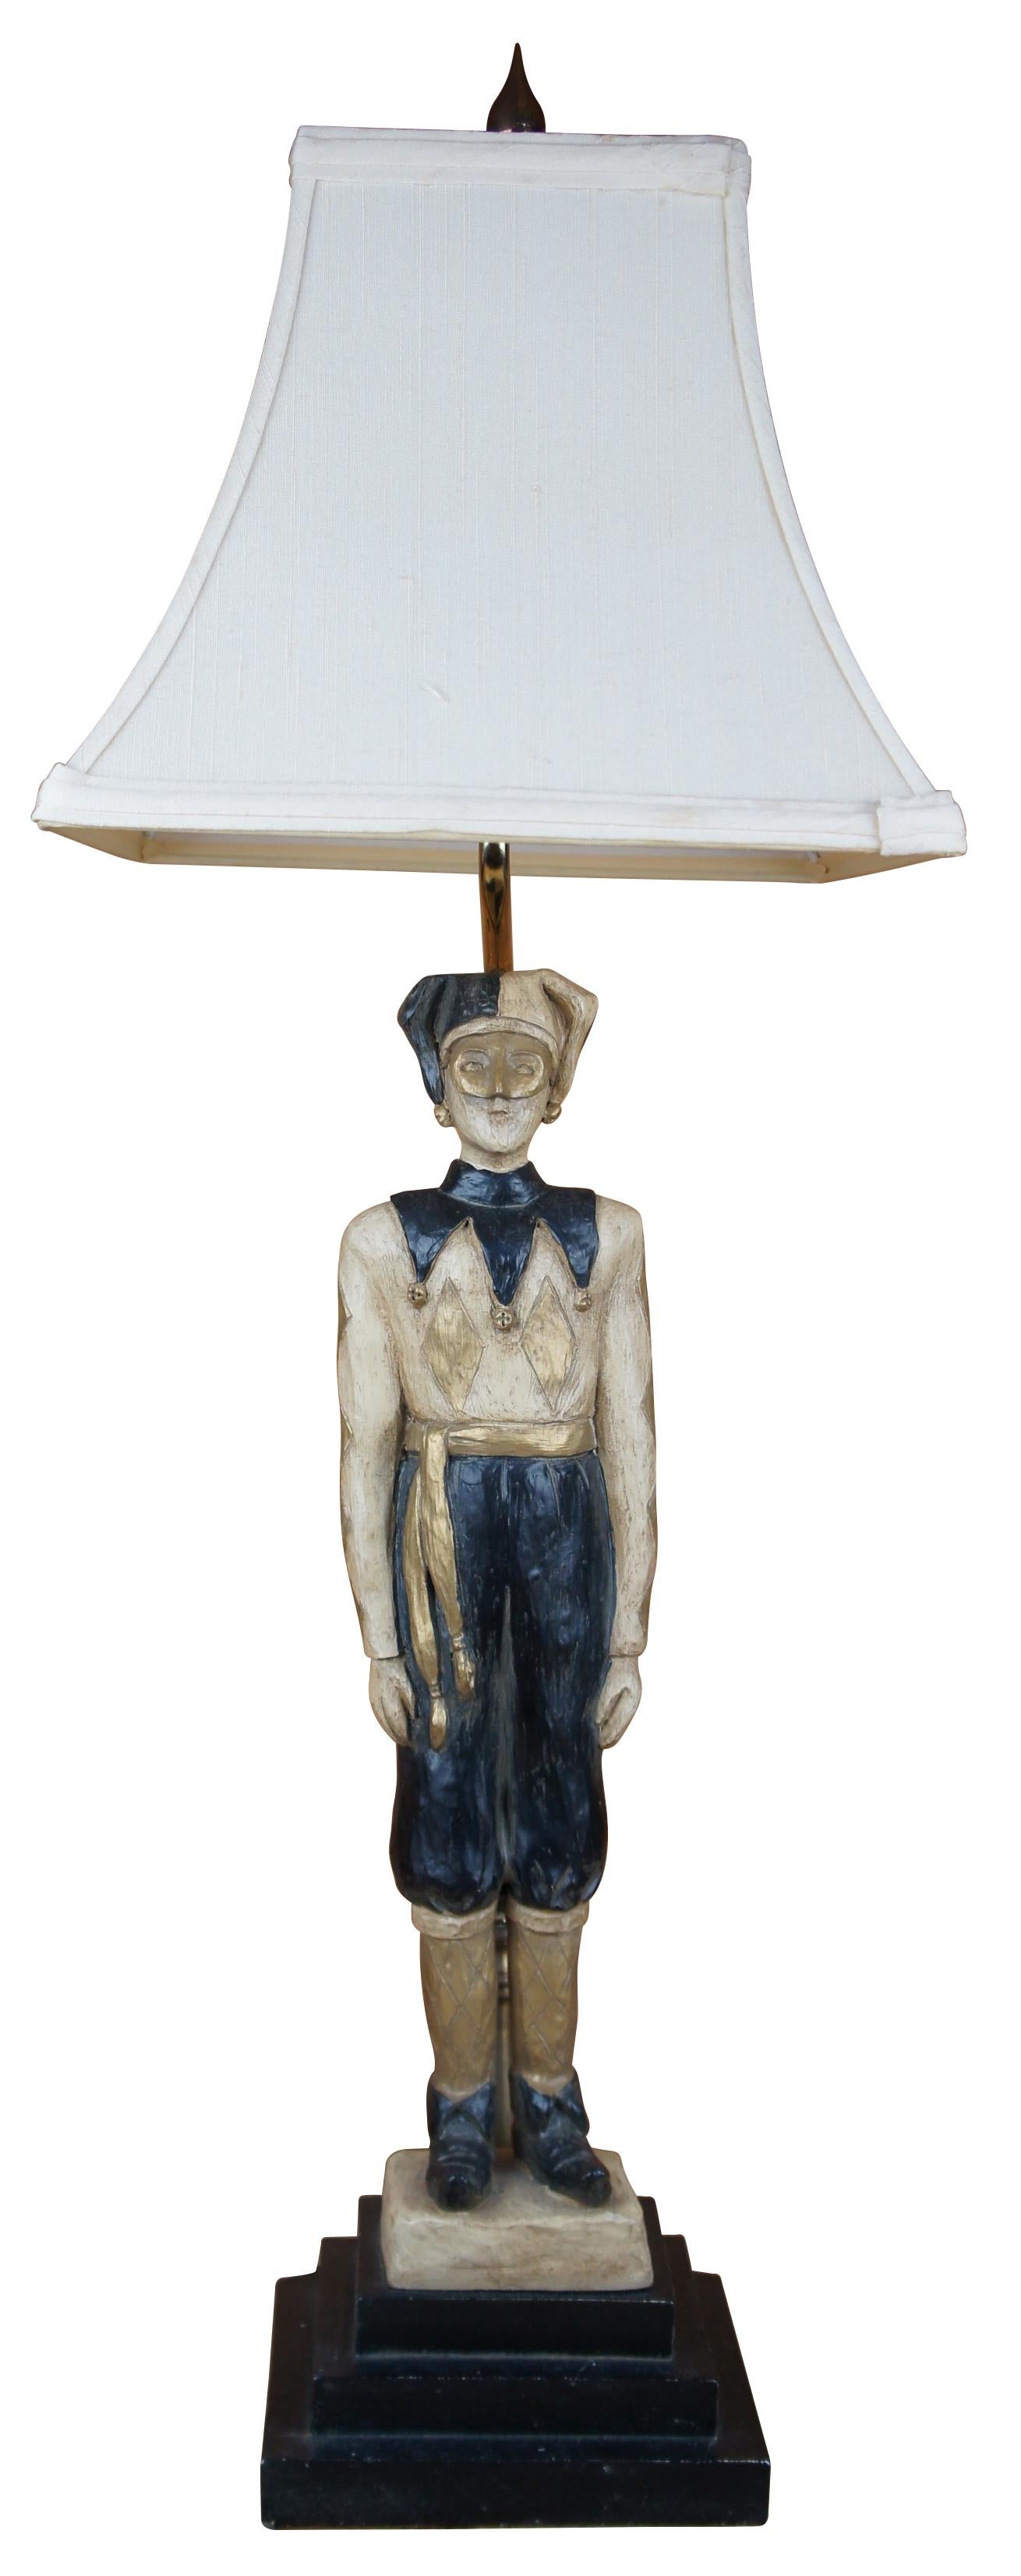 Vintage Ballard Design jester or harlequin lamp featuring a stoic figure in black and gold standing on a stacked base.

Measures: lamp- 6.125